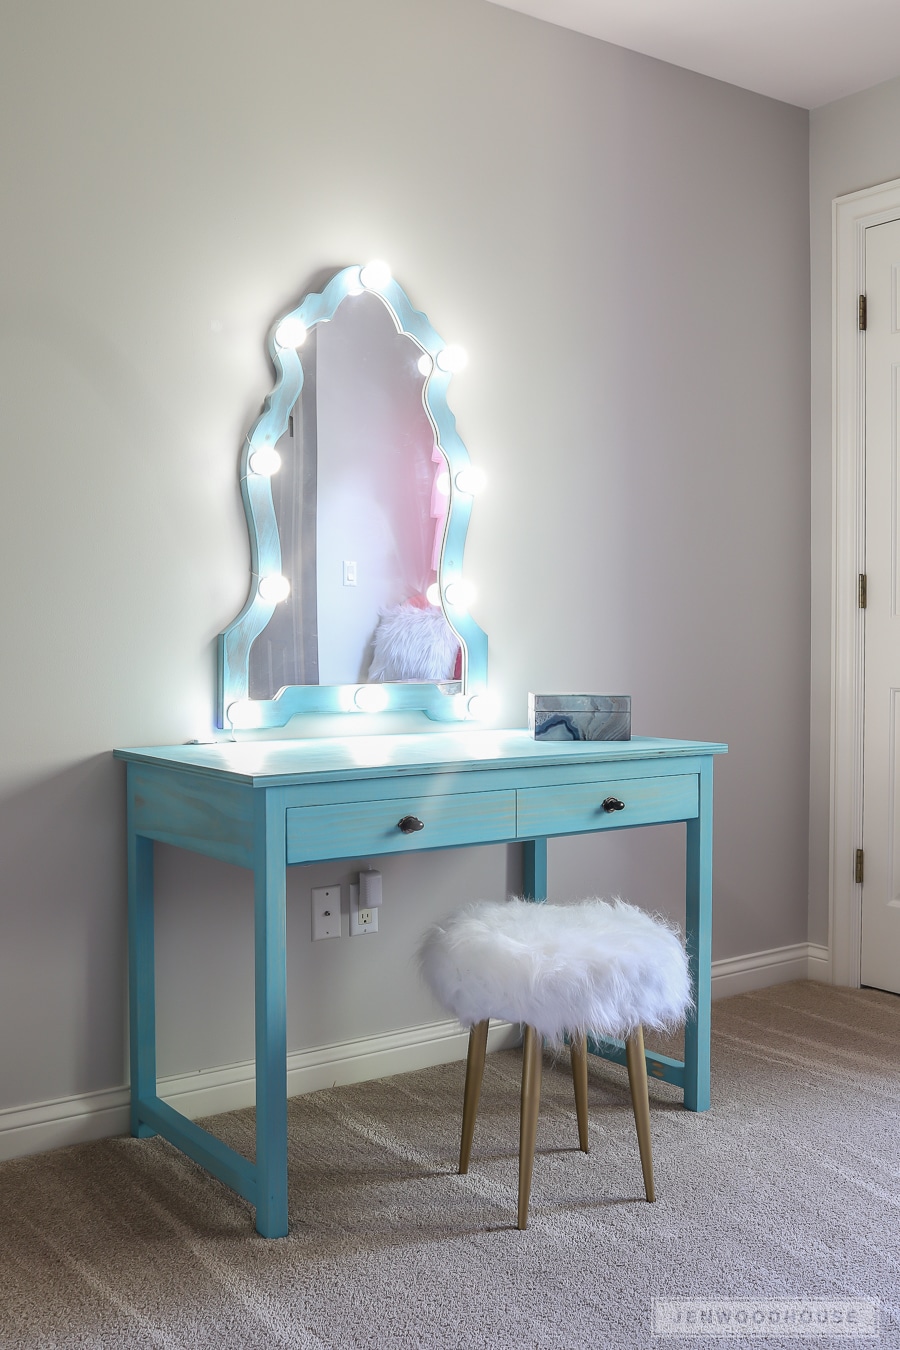 How To Build A Diy Makeup Vanity With, Do It Yourself Vanity Ideas